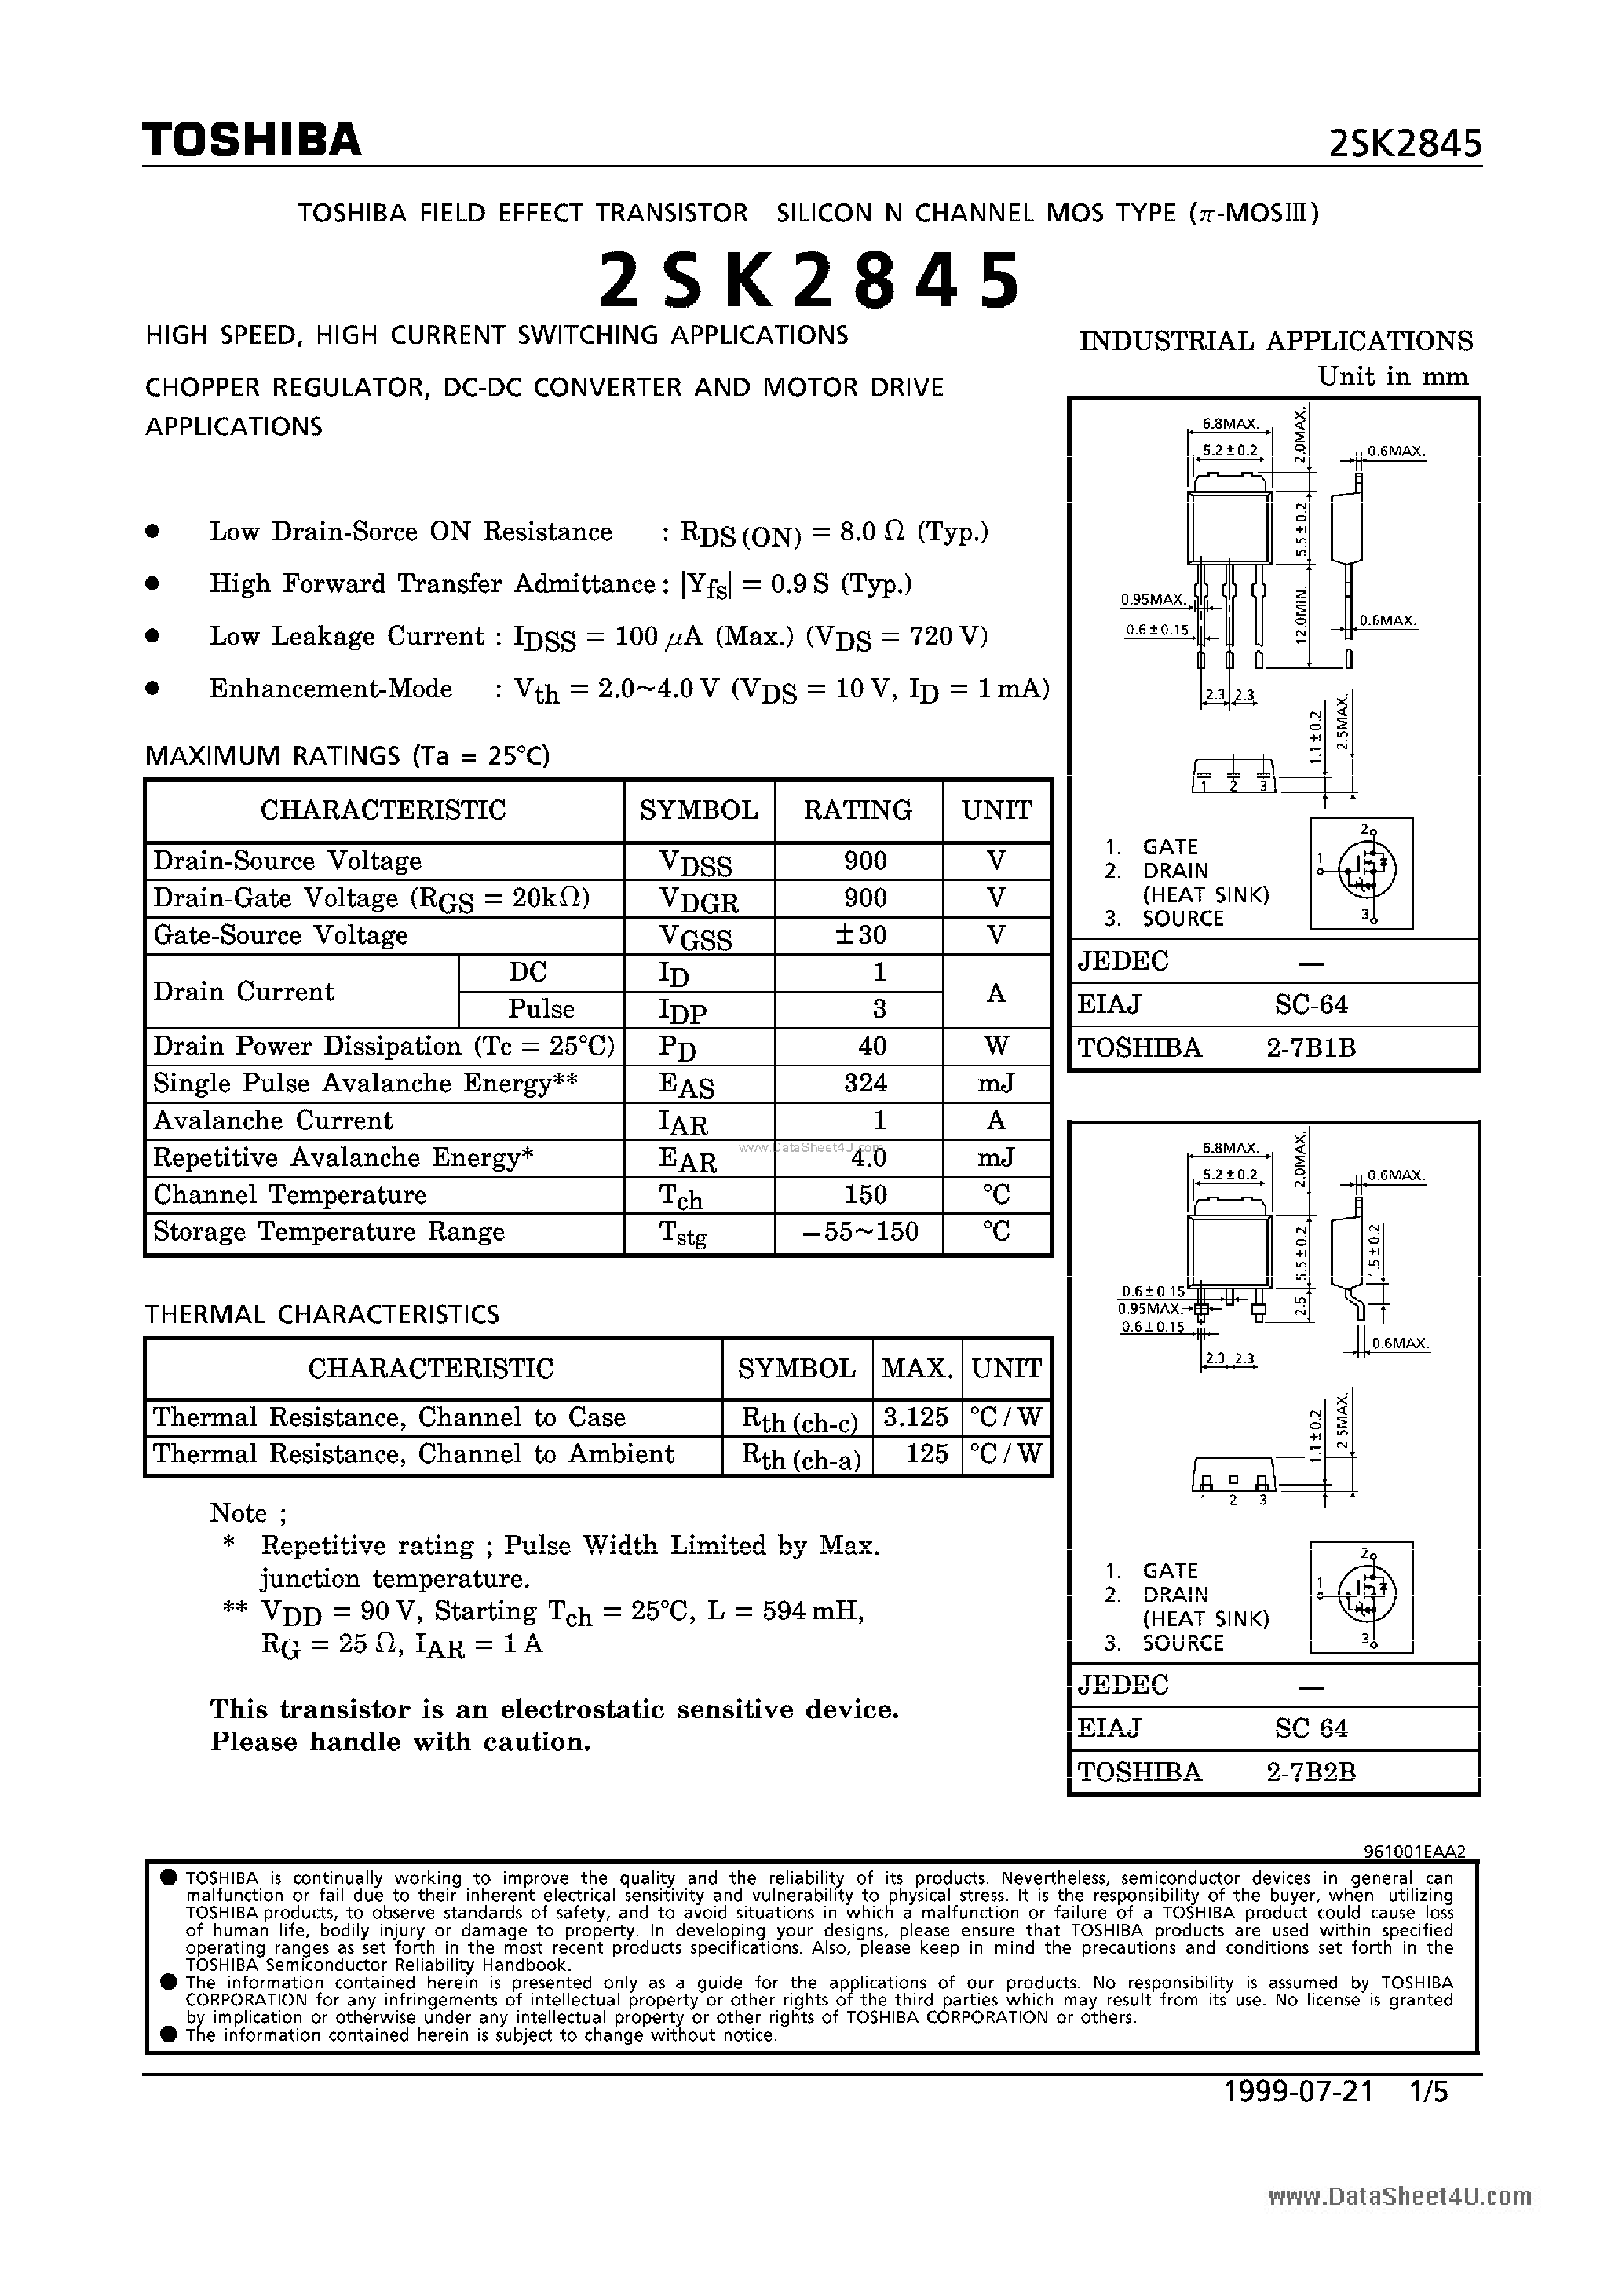 Datasheet K2845 - Search -----> 2SK2845 page 1